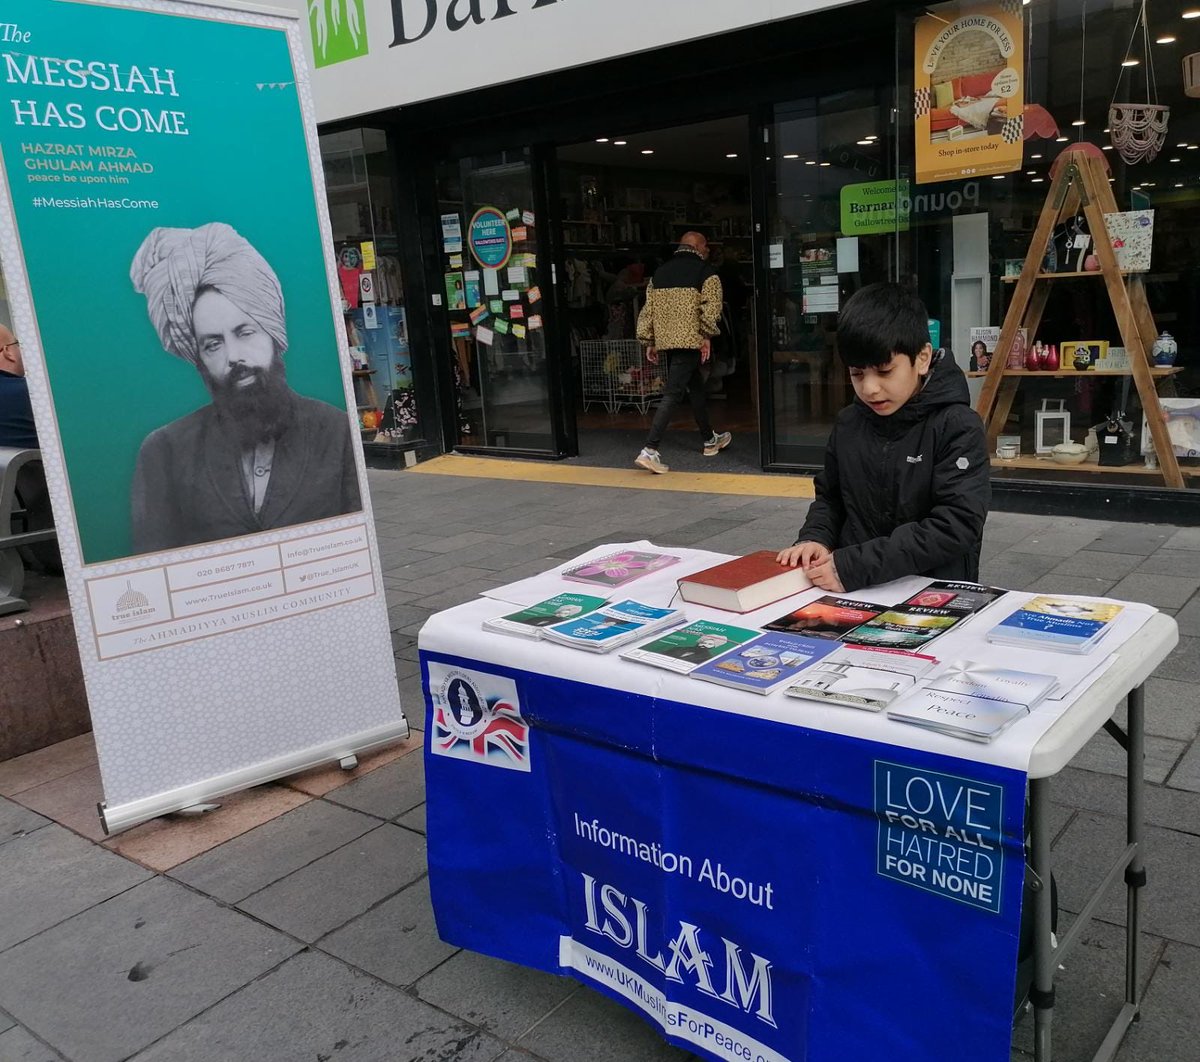 Leicester Ahmadiyya Muslim committee do bookstall on Saturday 25th of March.
43 leaflets taken by public on various topics. Many questions answered for the public who were very pleased.

⁦@ukmuslims4peace⁩